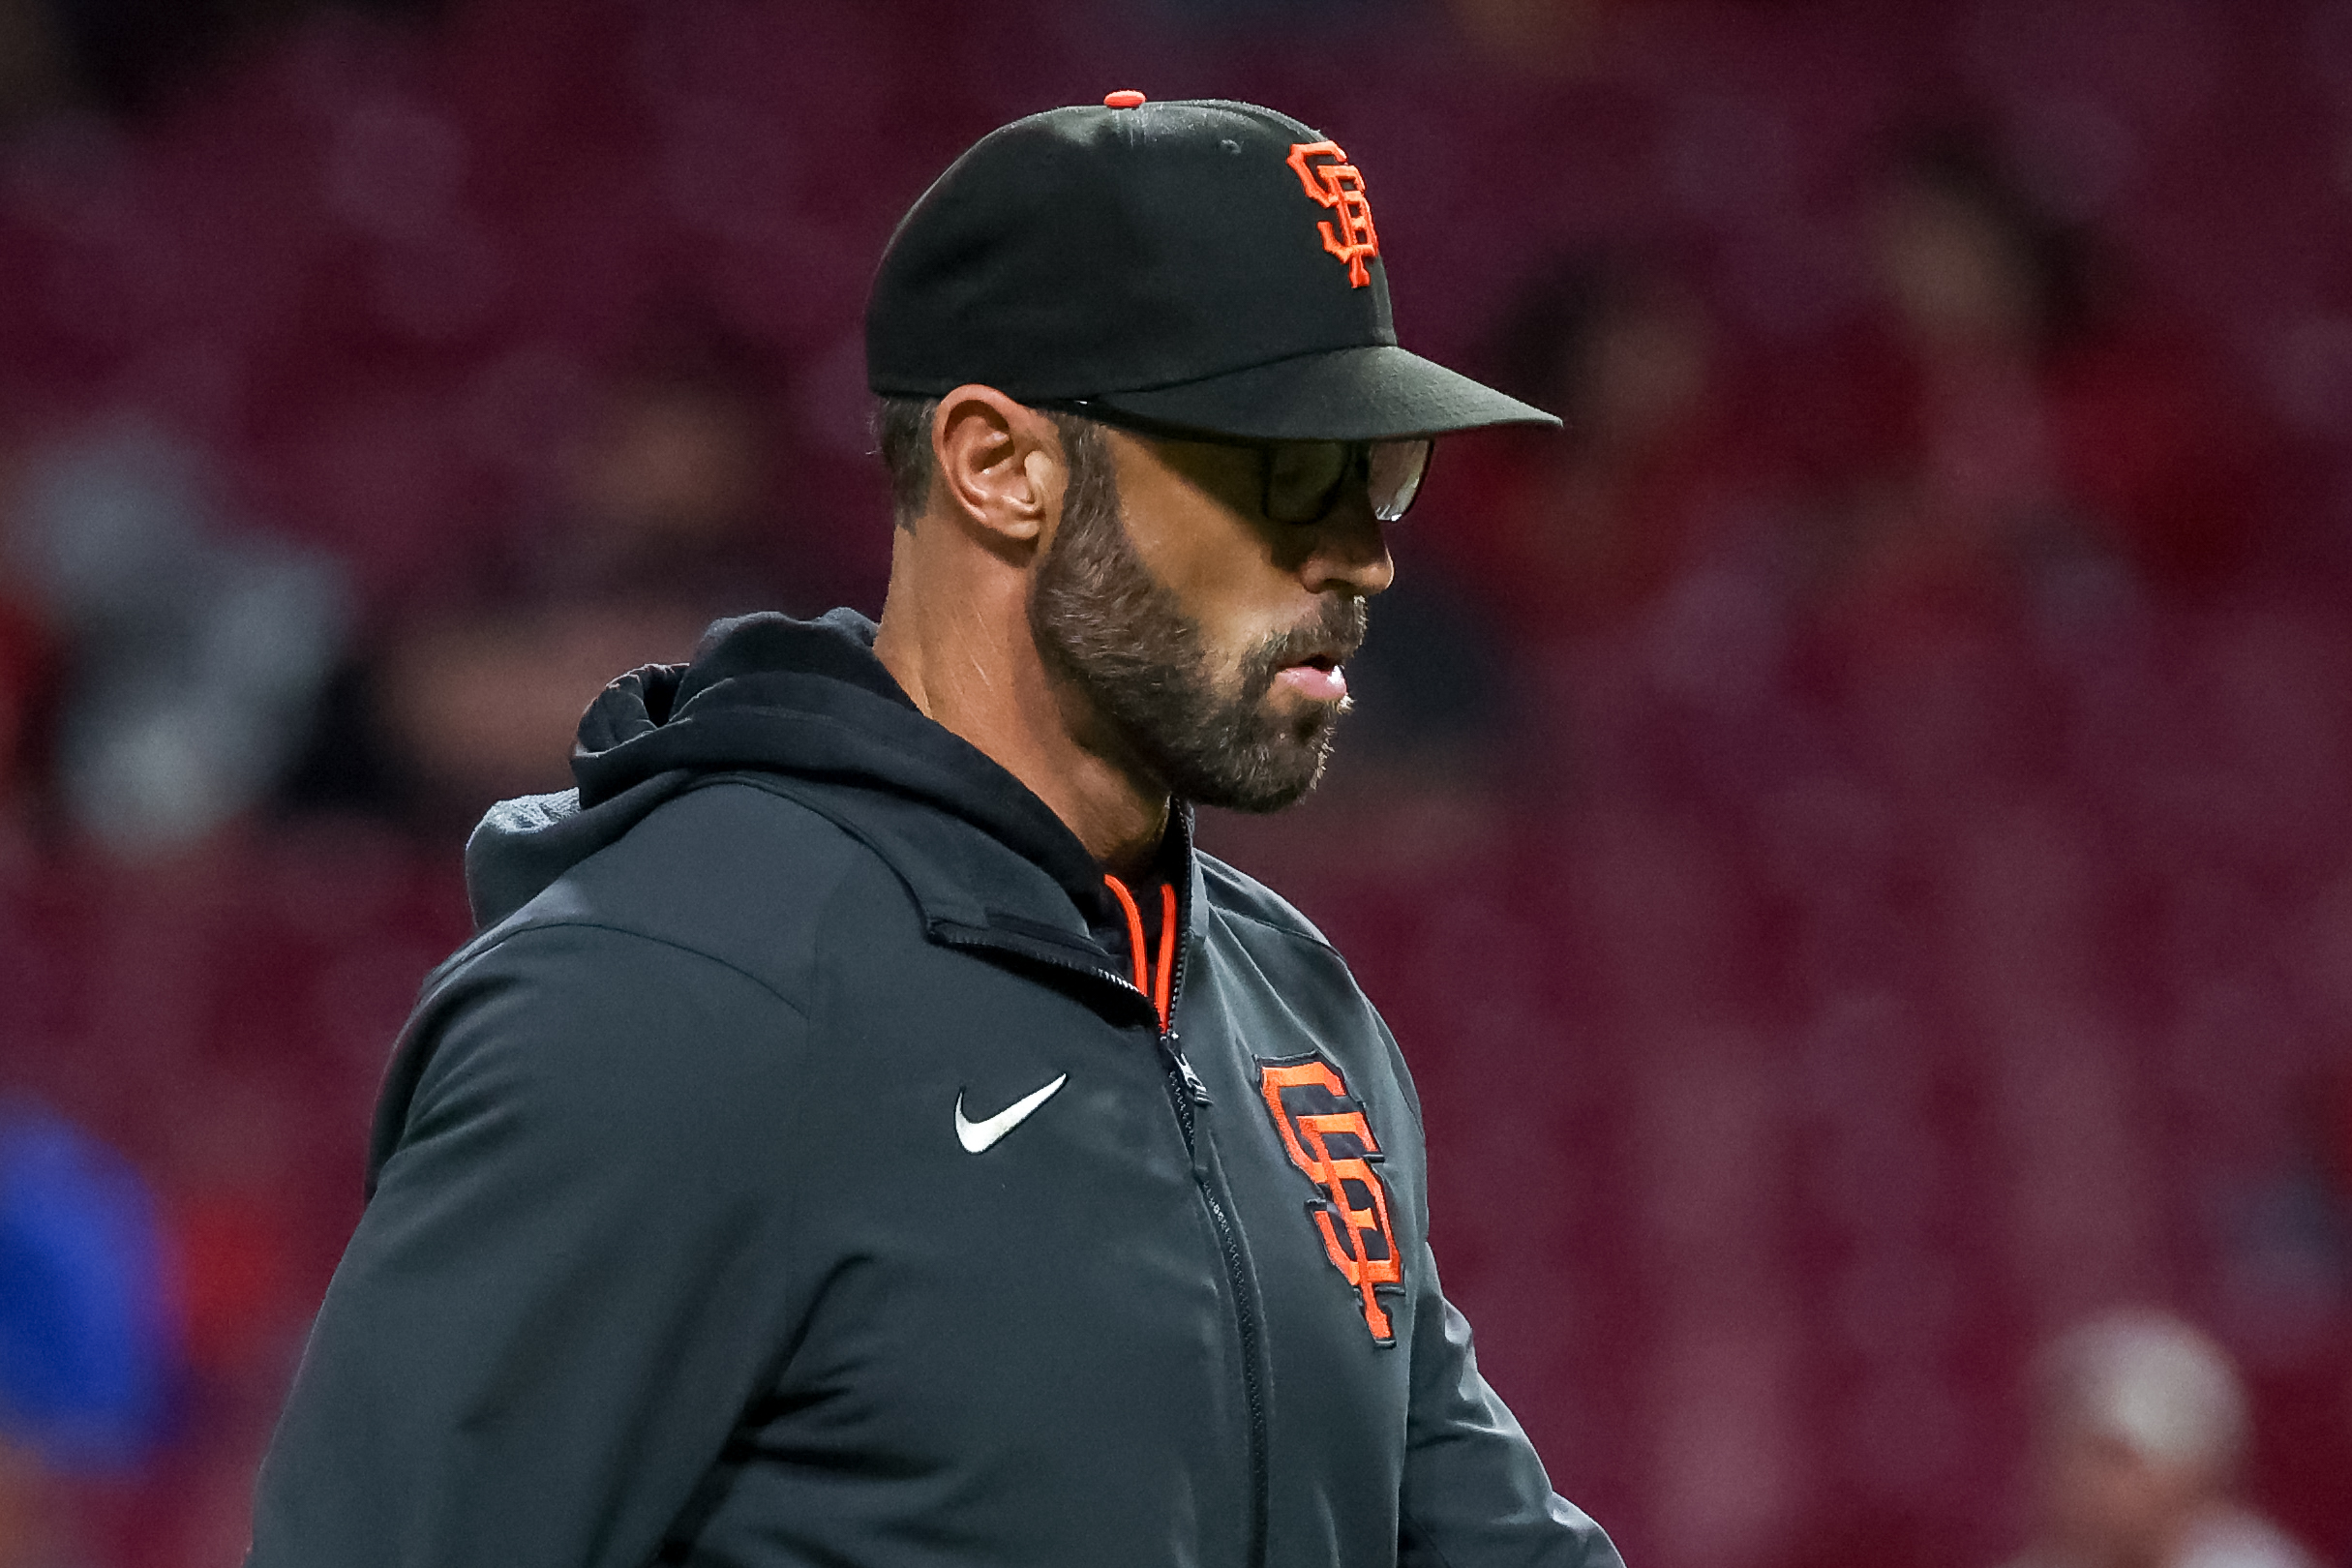 SF Giants' best days in 2022 are still ahead of them